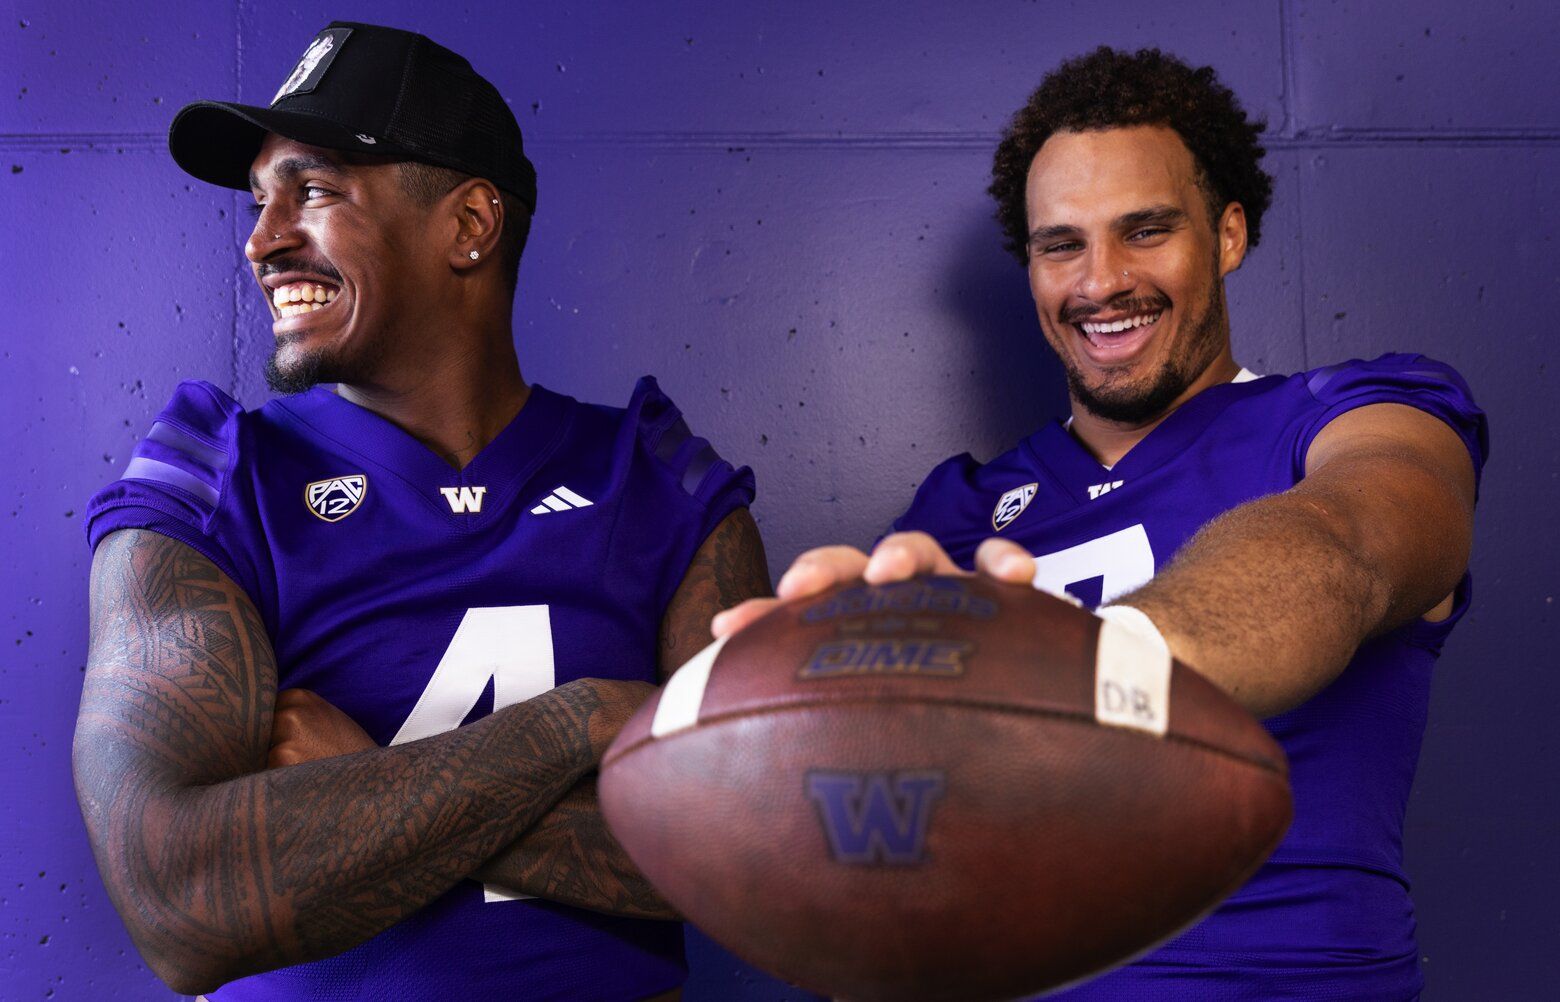 UW's Bralen Trice and Zion Tupuola-Fetui are back to turn up the